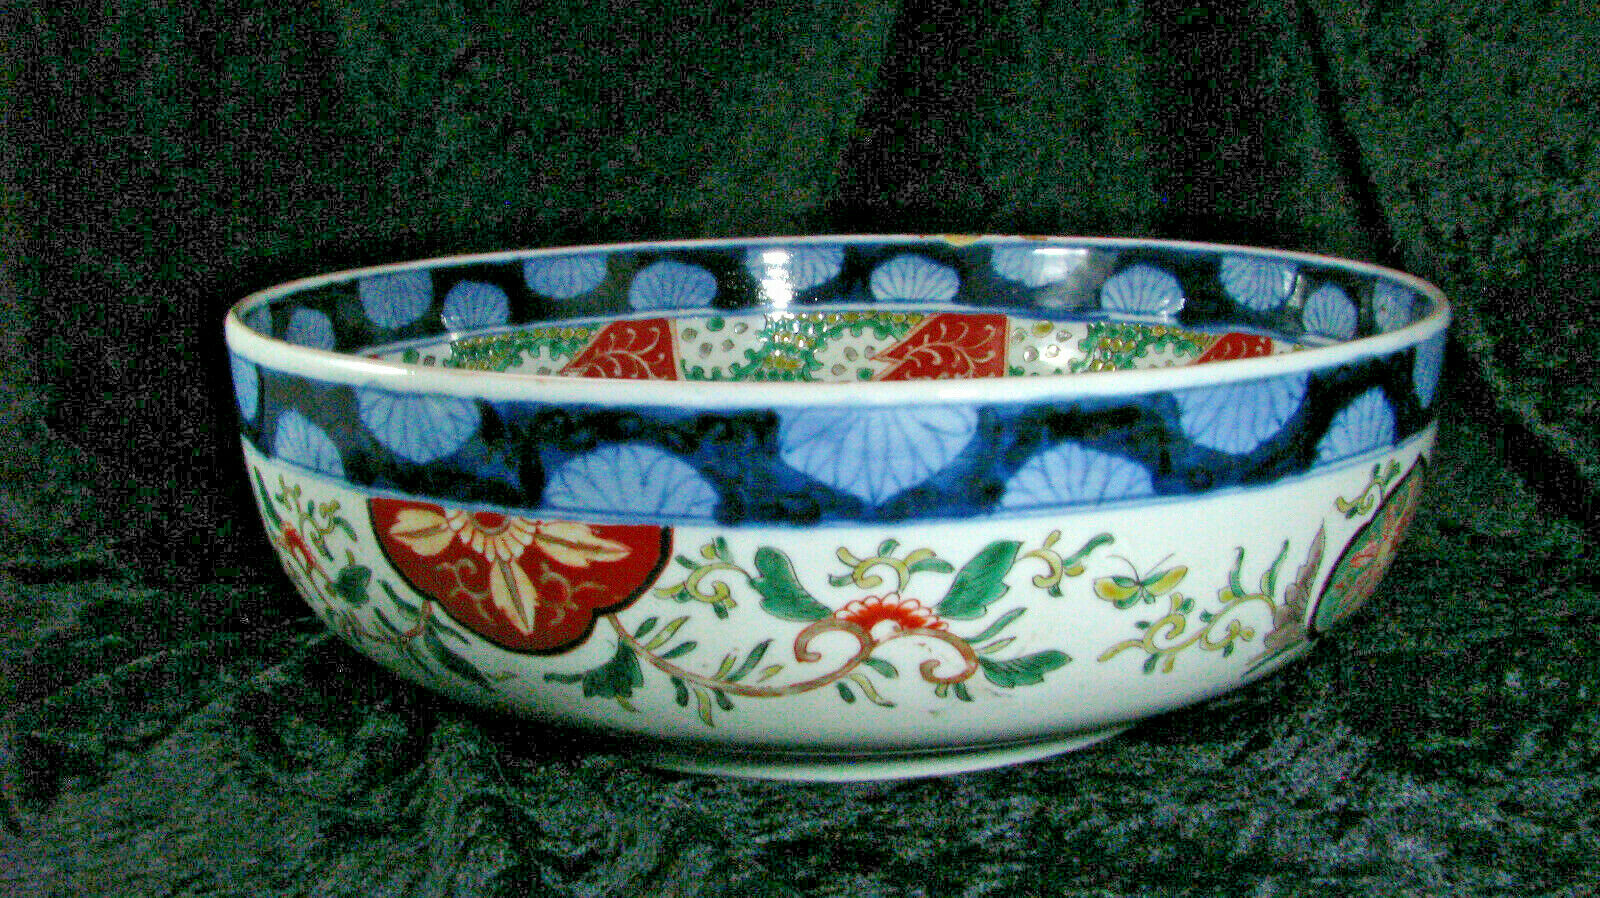 Antique Japanese Meiji 11" Large Porcelain Bowl from 1868 to 1912